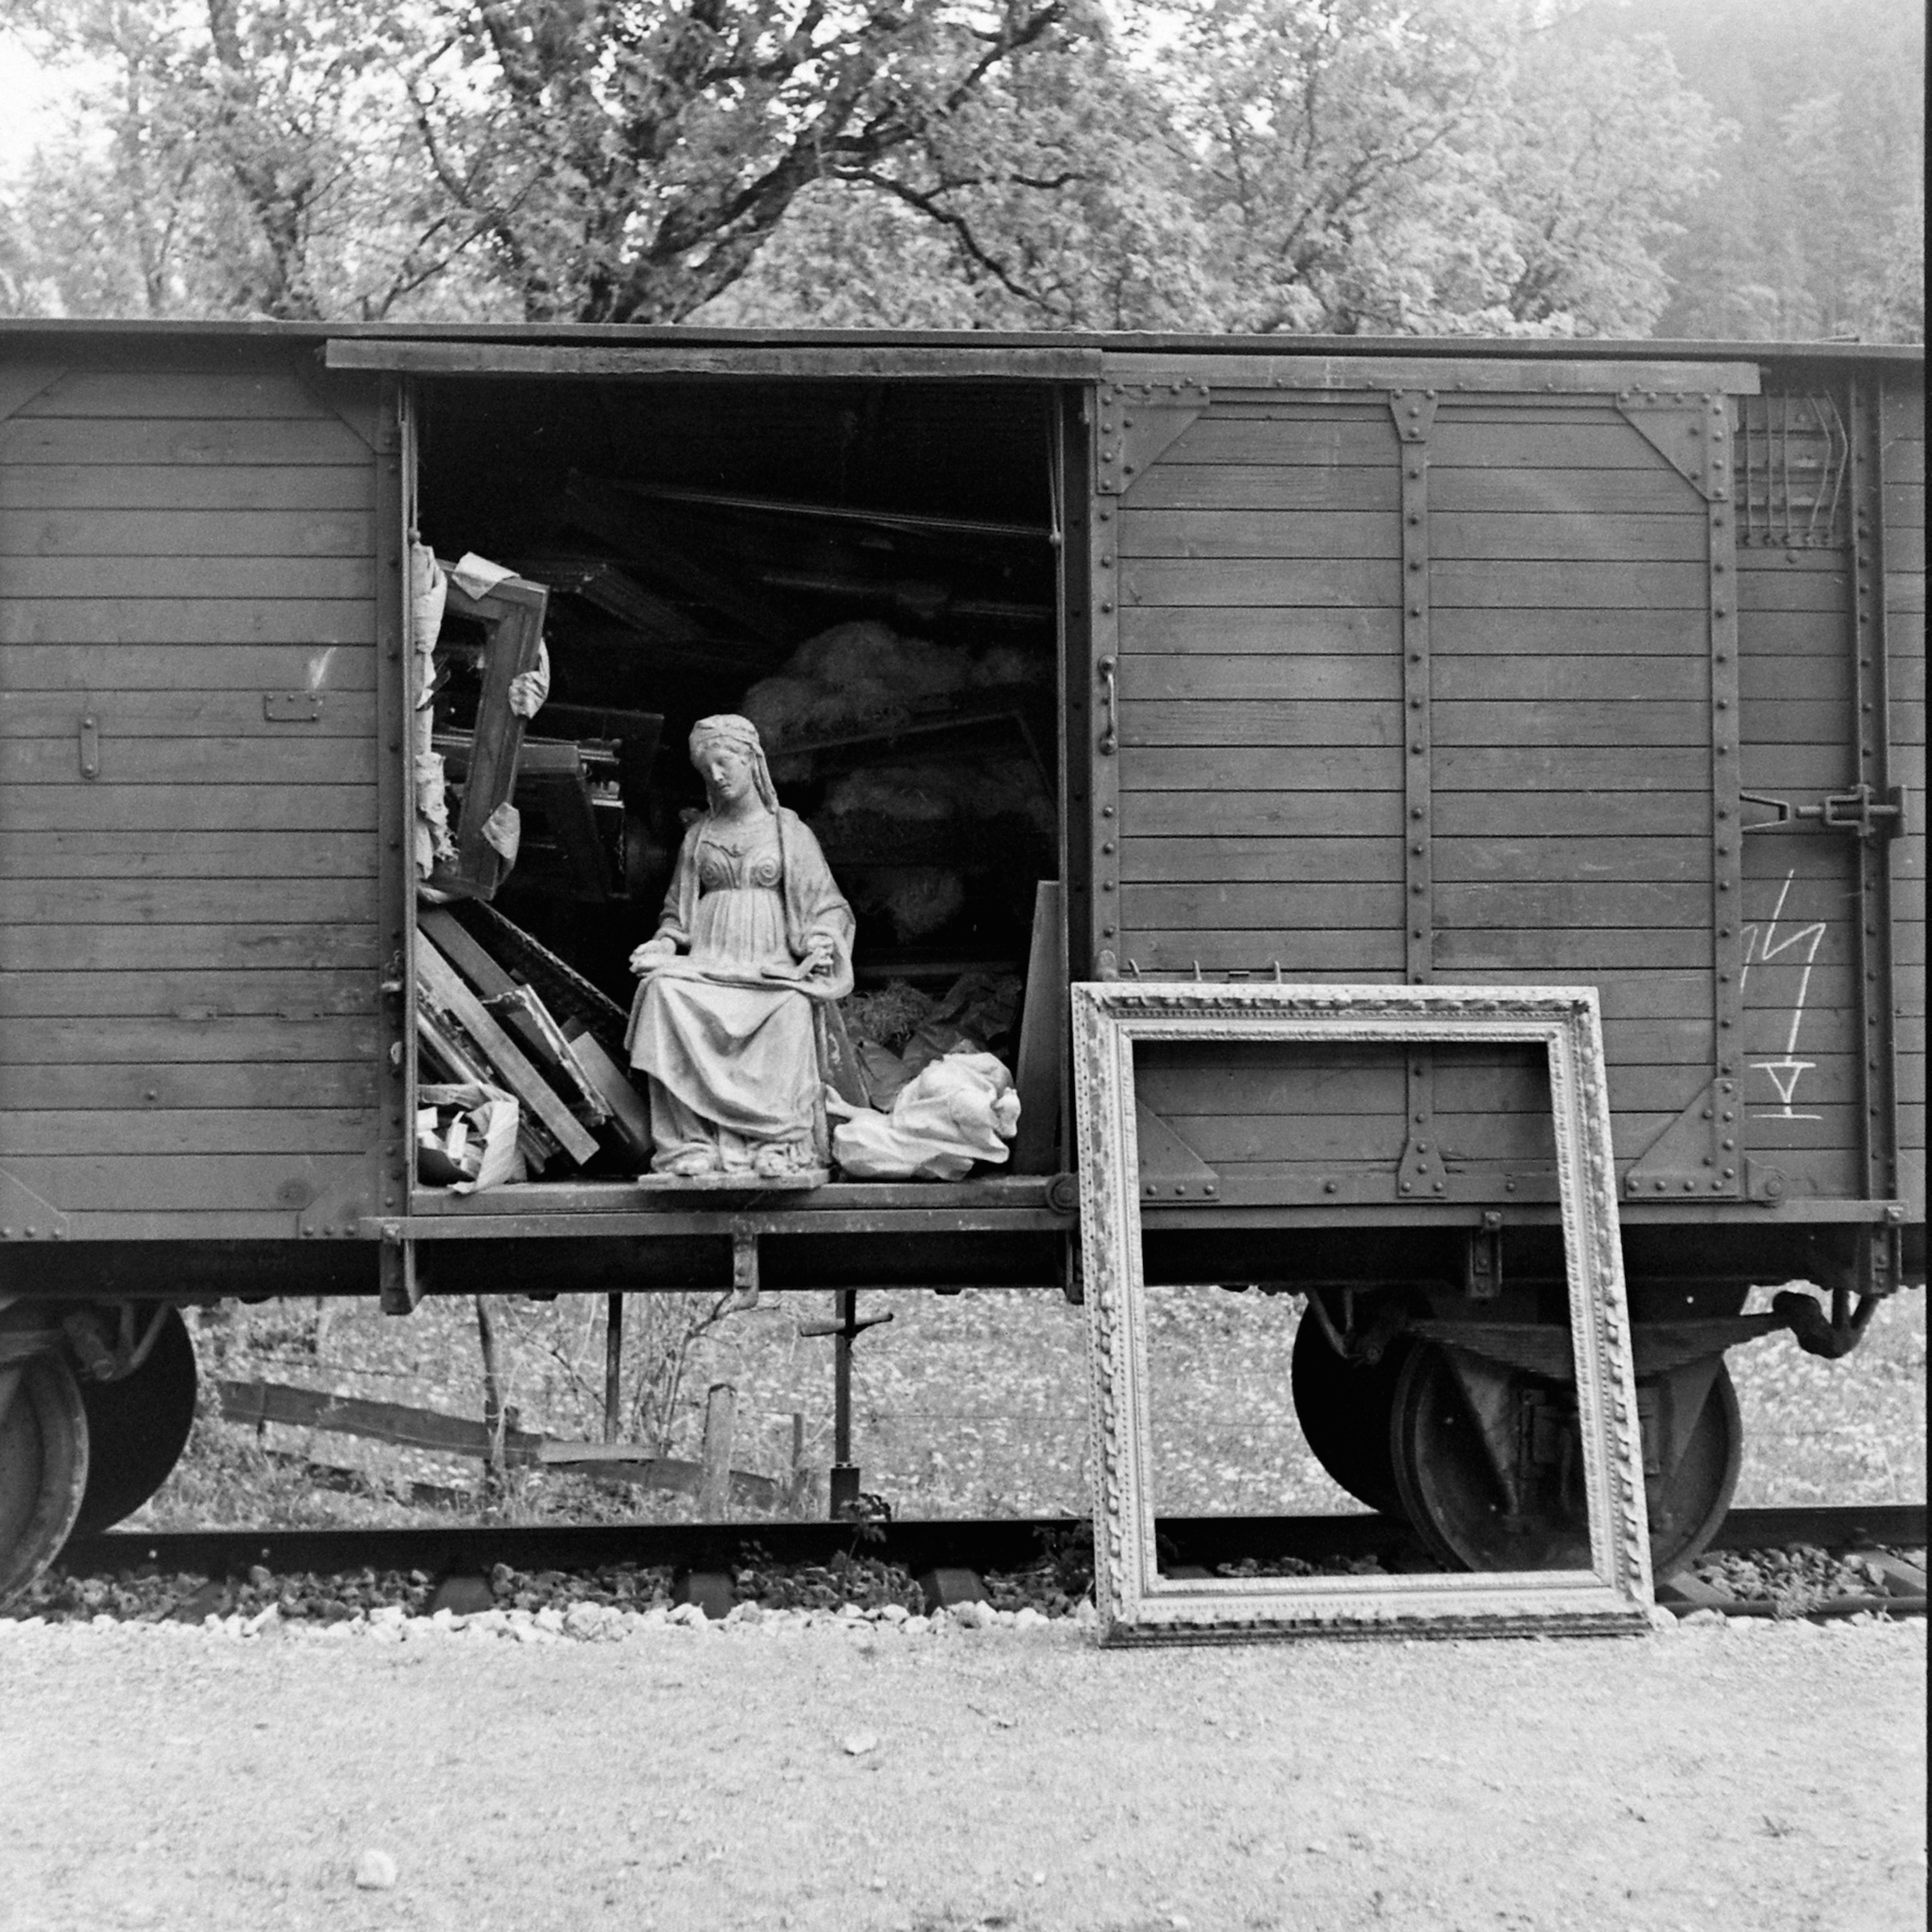 View of a train boxcar, through the open door of which can be seen some of the art collection looted by the Nazis, near Berchtesgaden, Germany, 1945. (William Vandivery—The LIFE Images Collection/Getty)